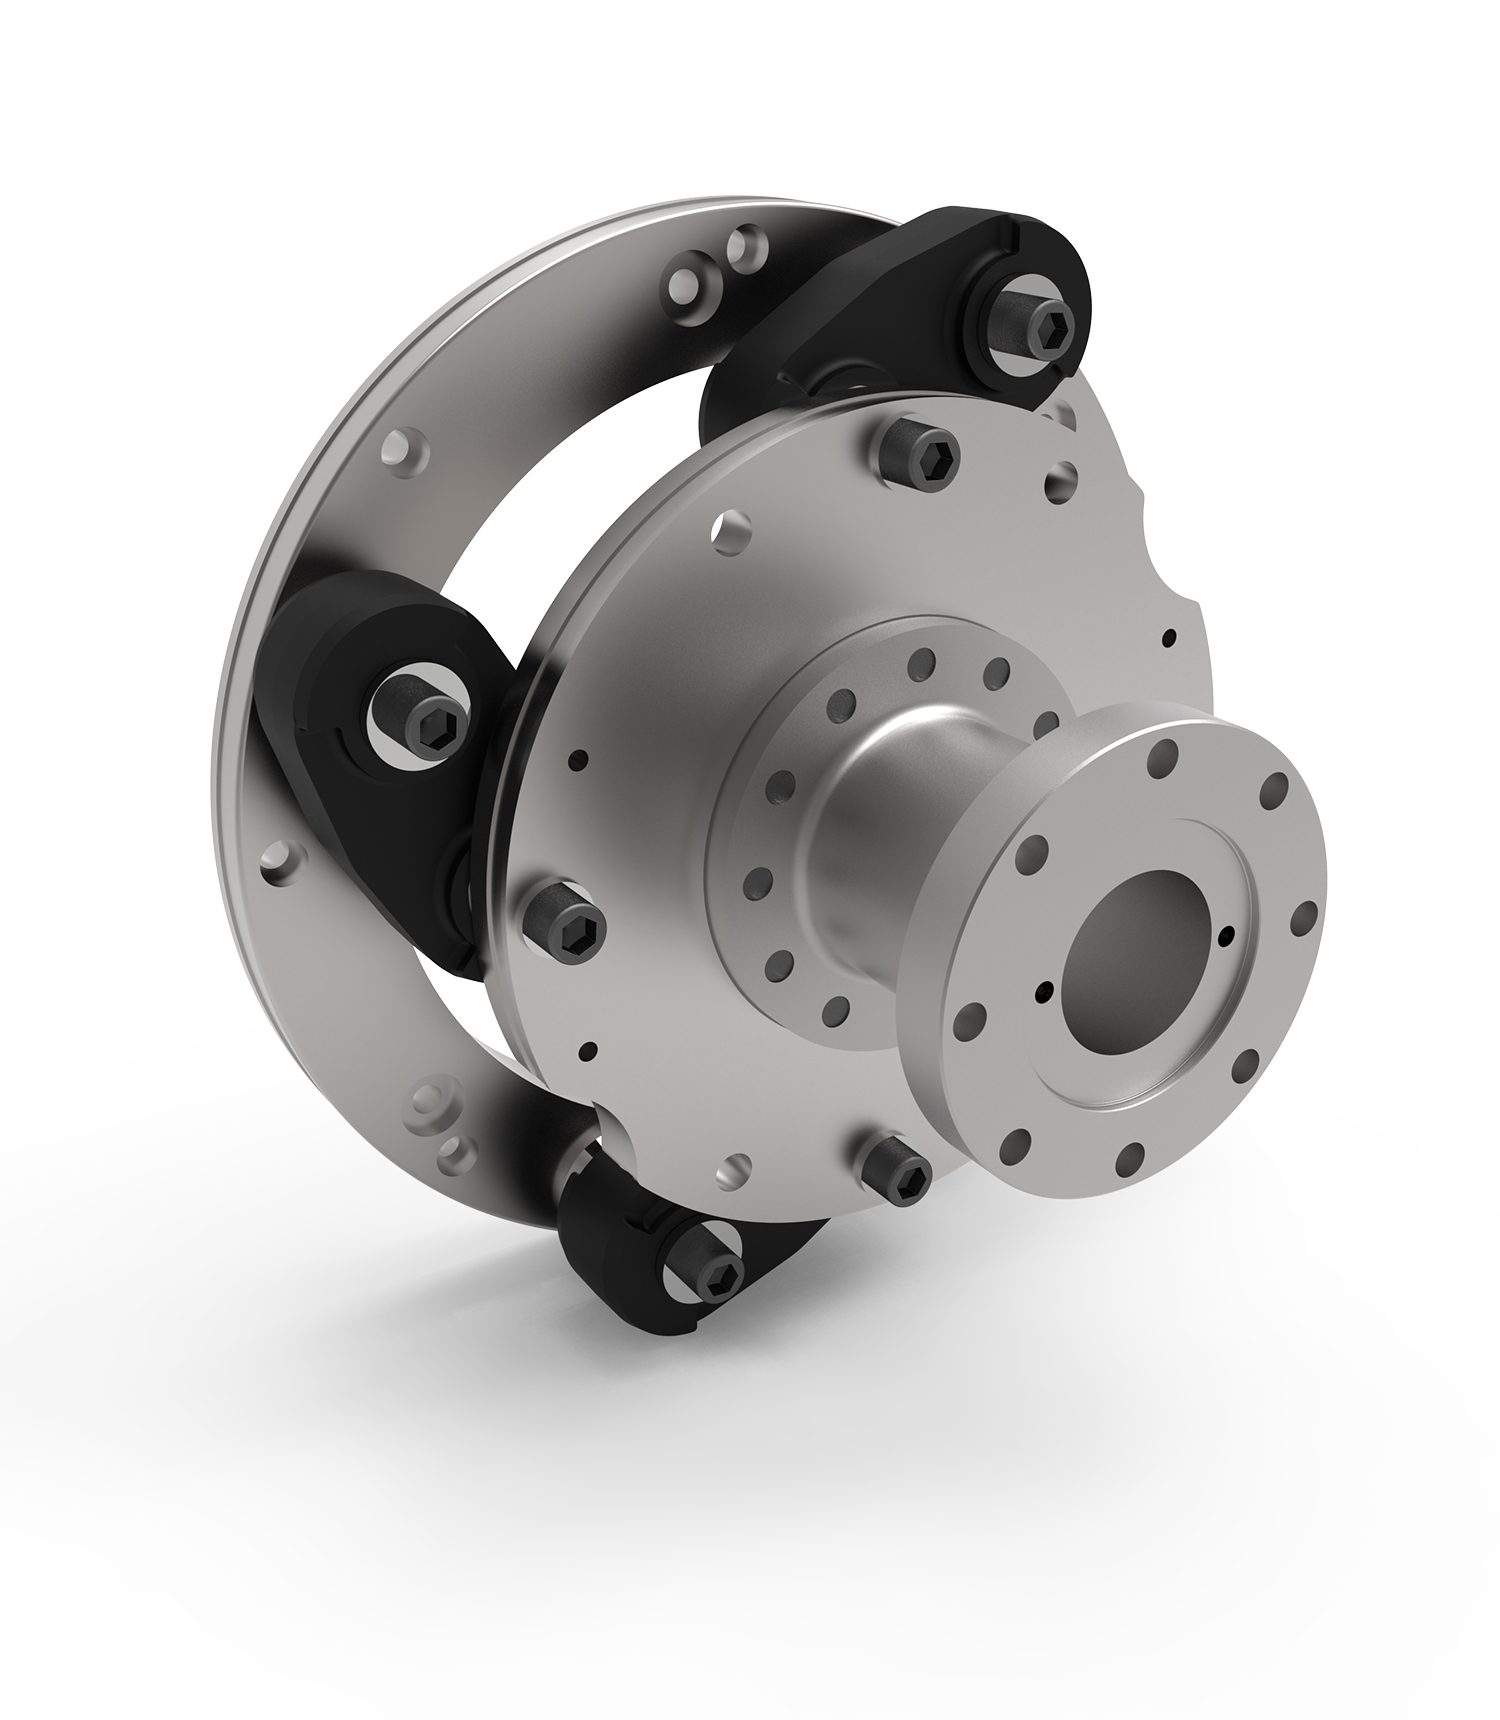 The Stromag Vector® coupling has high torque transmission capabilities and very compact dimensions.